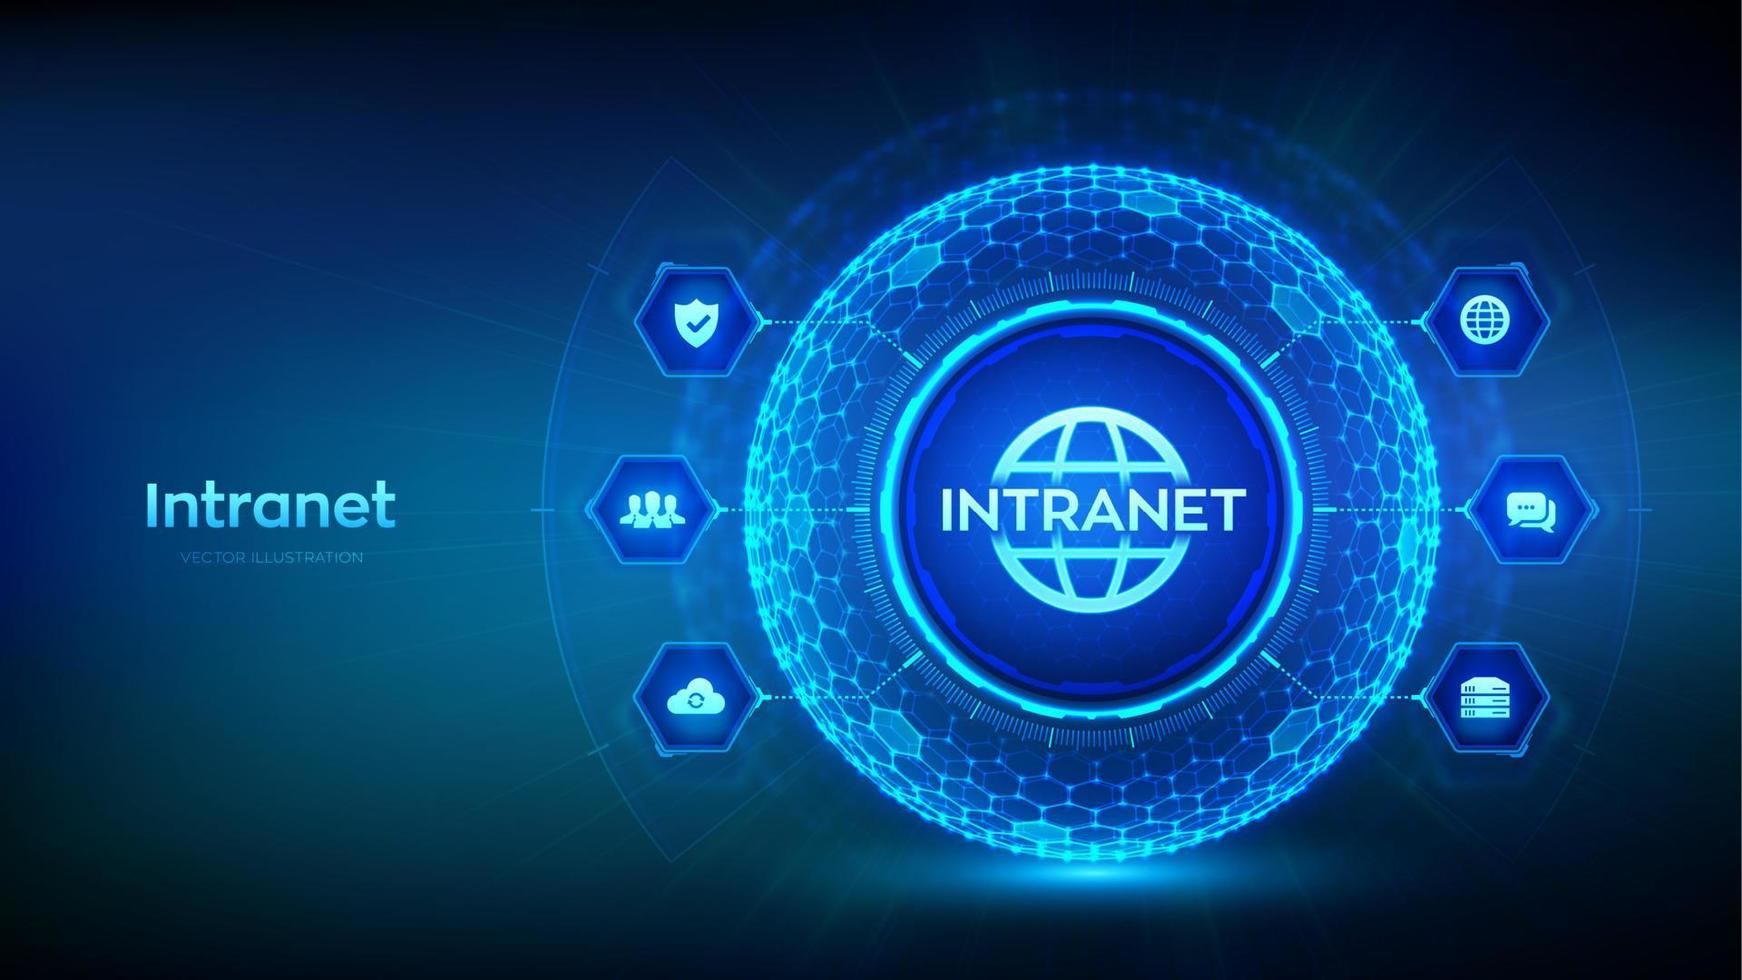 INTRANET. Global Network Connection Technology abstract concept. Hexagonal grid sphere background. Intranet Business Corporate communication document management system dms. Vector illustration.